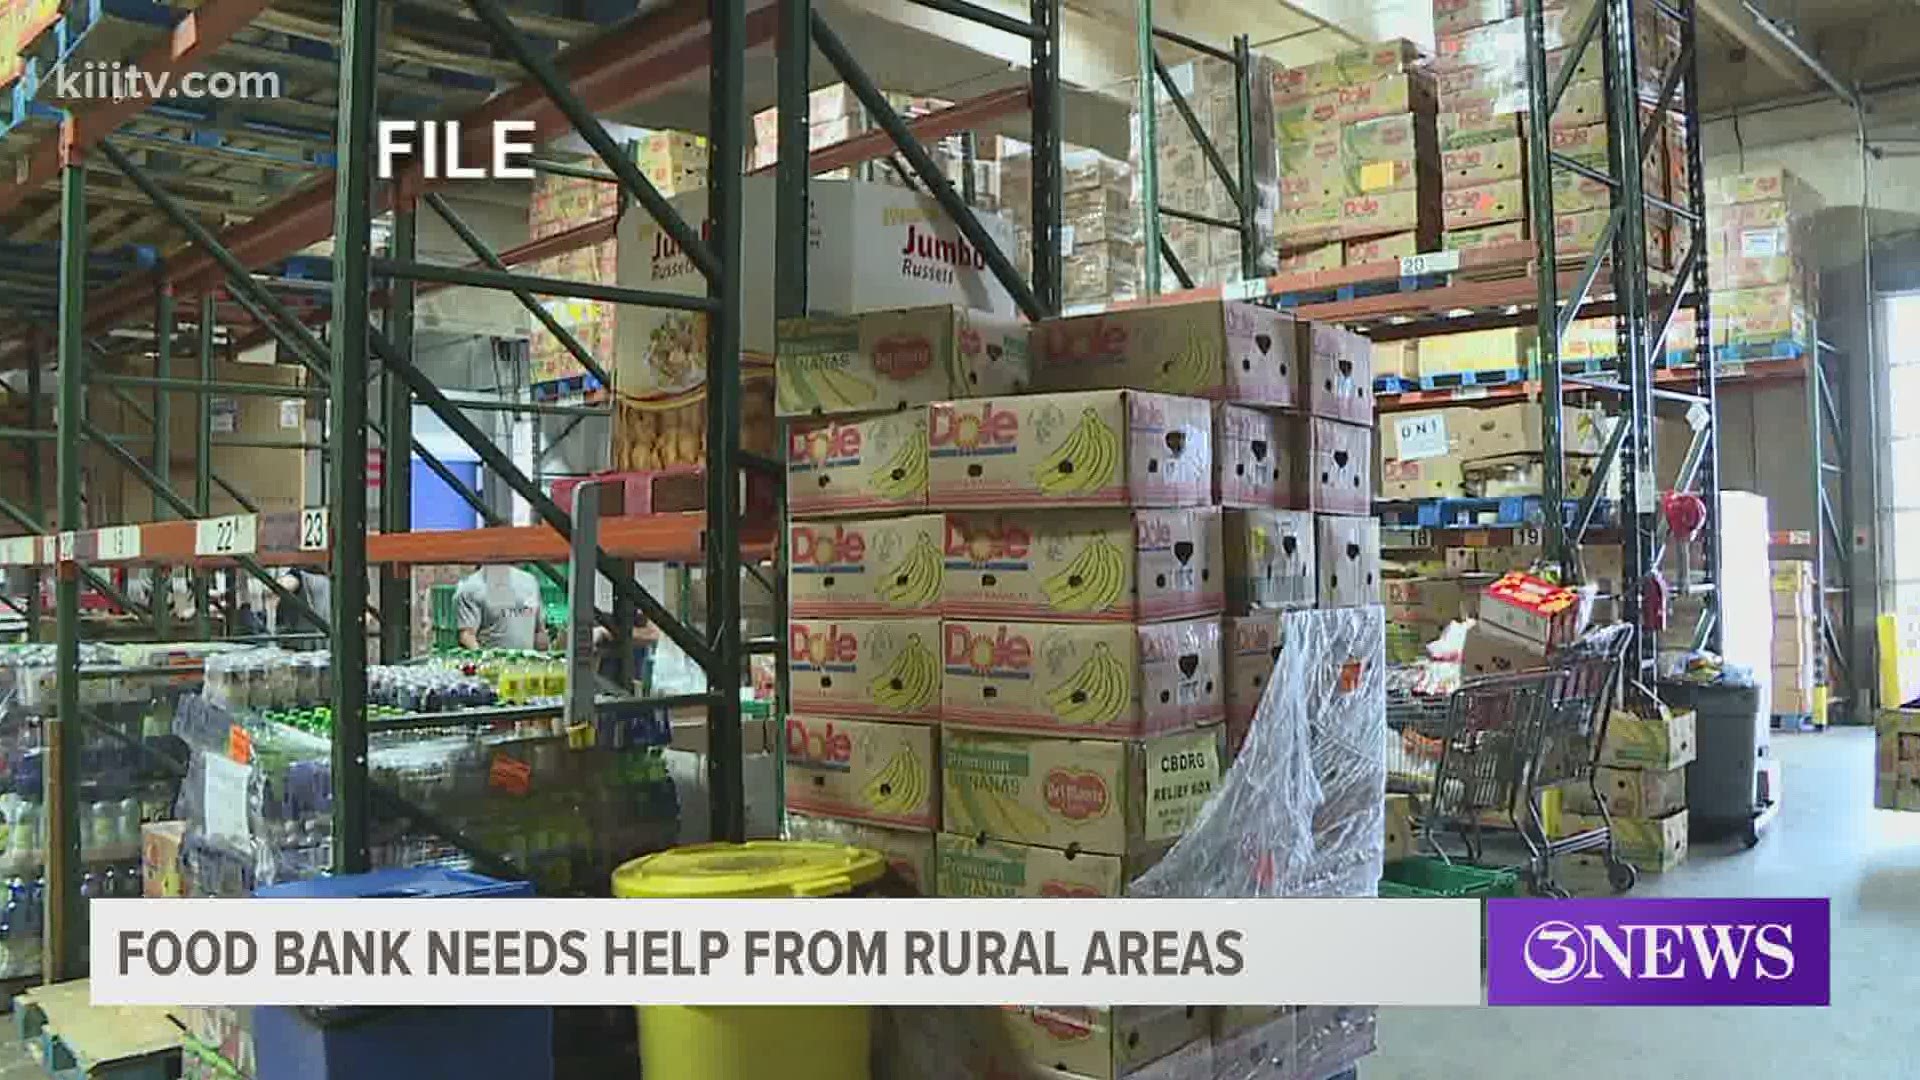 The demand for extra hands at the food bank has been high for months.